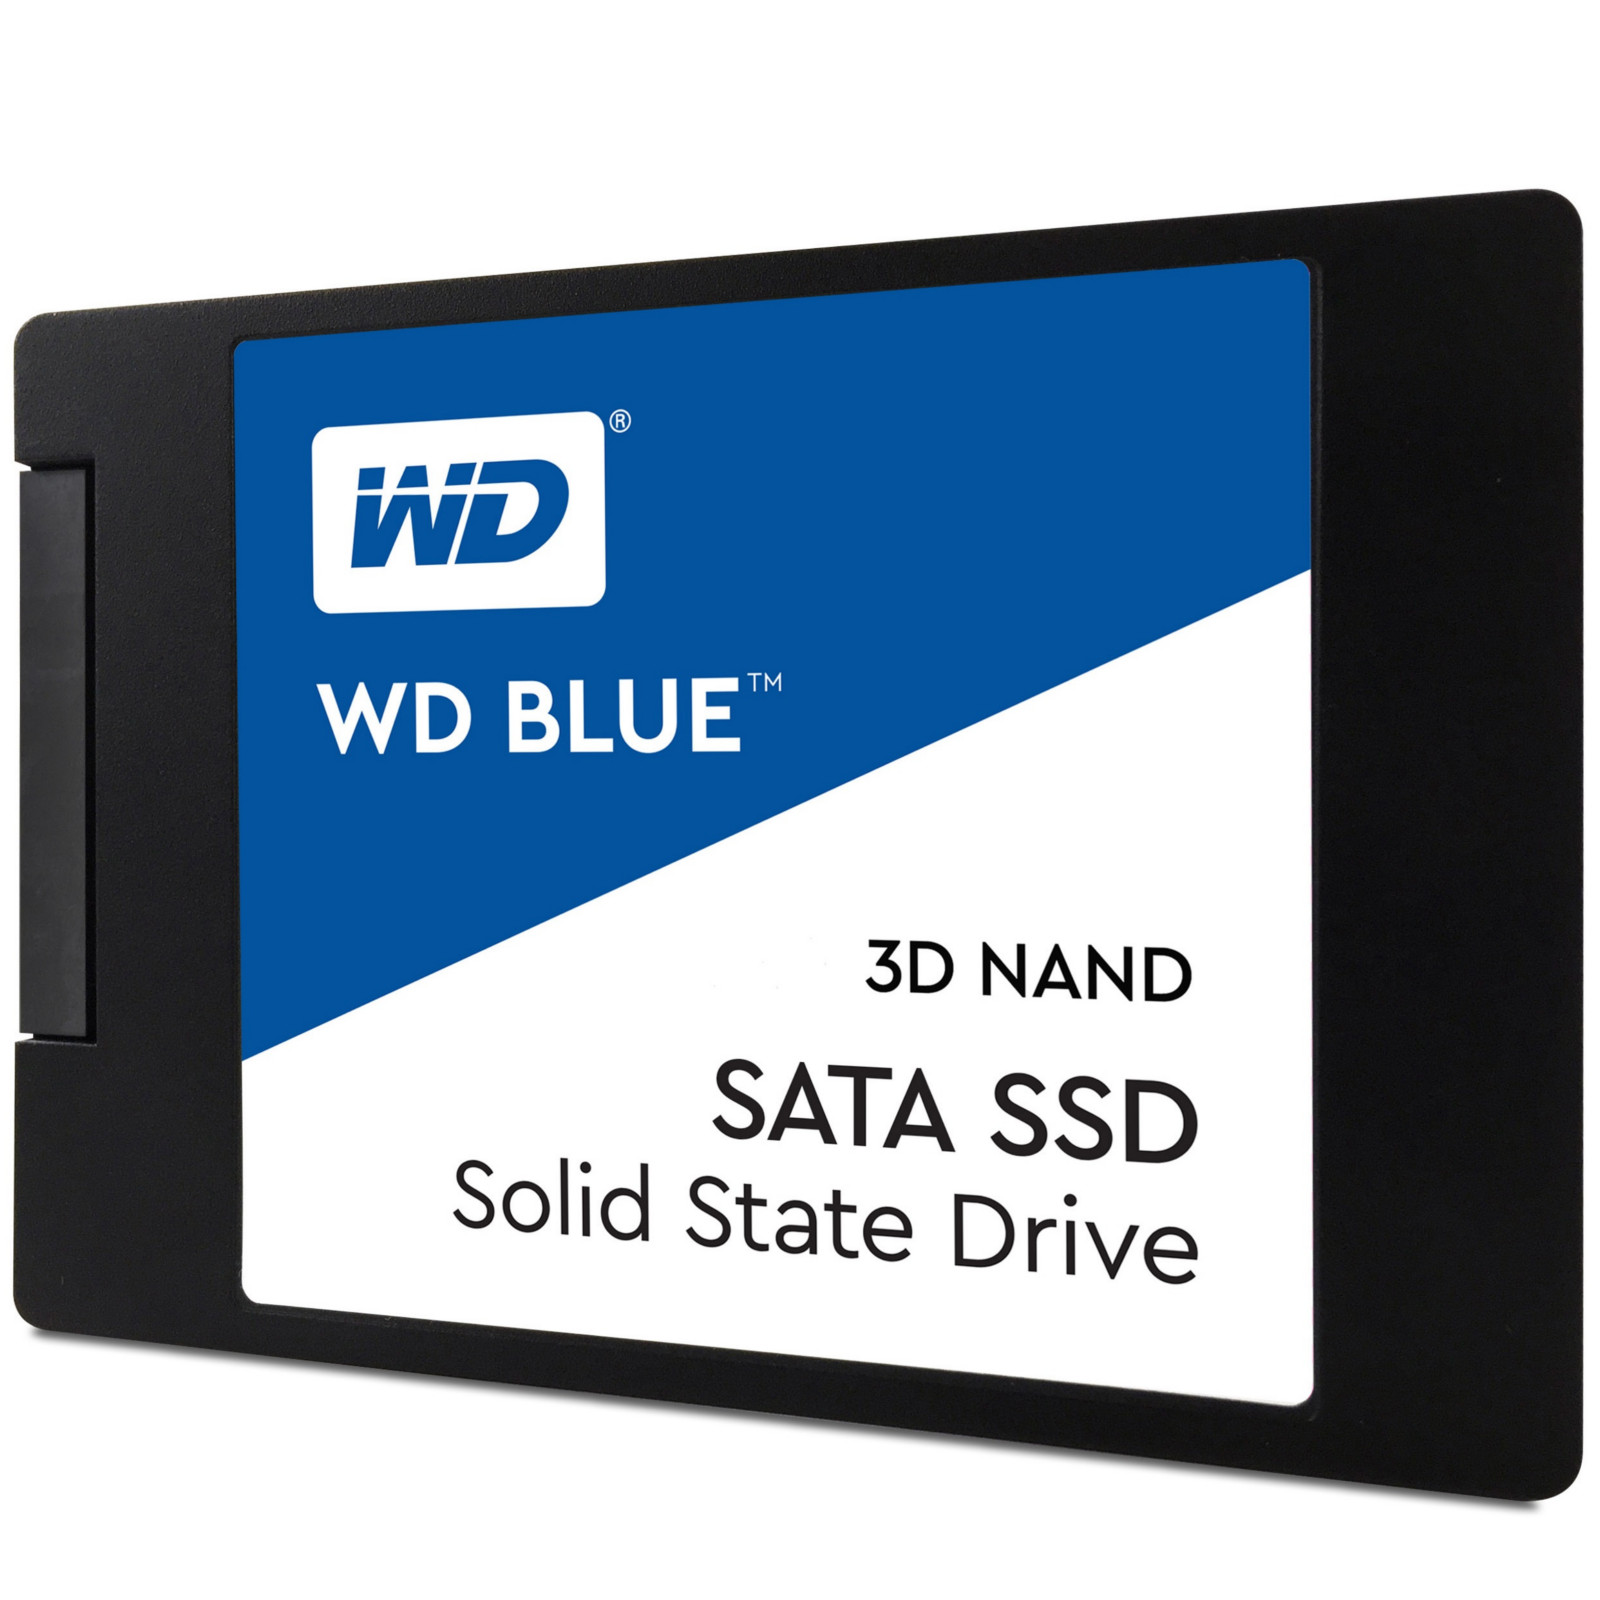 WD - WD Blue 250GB 3D NAND SSD 2.5 SATA 6Gbps Solid State Drive (WDS250G2B0A)